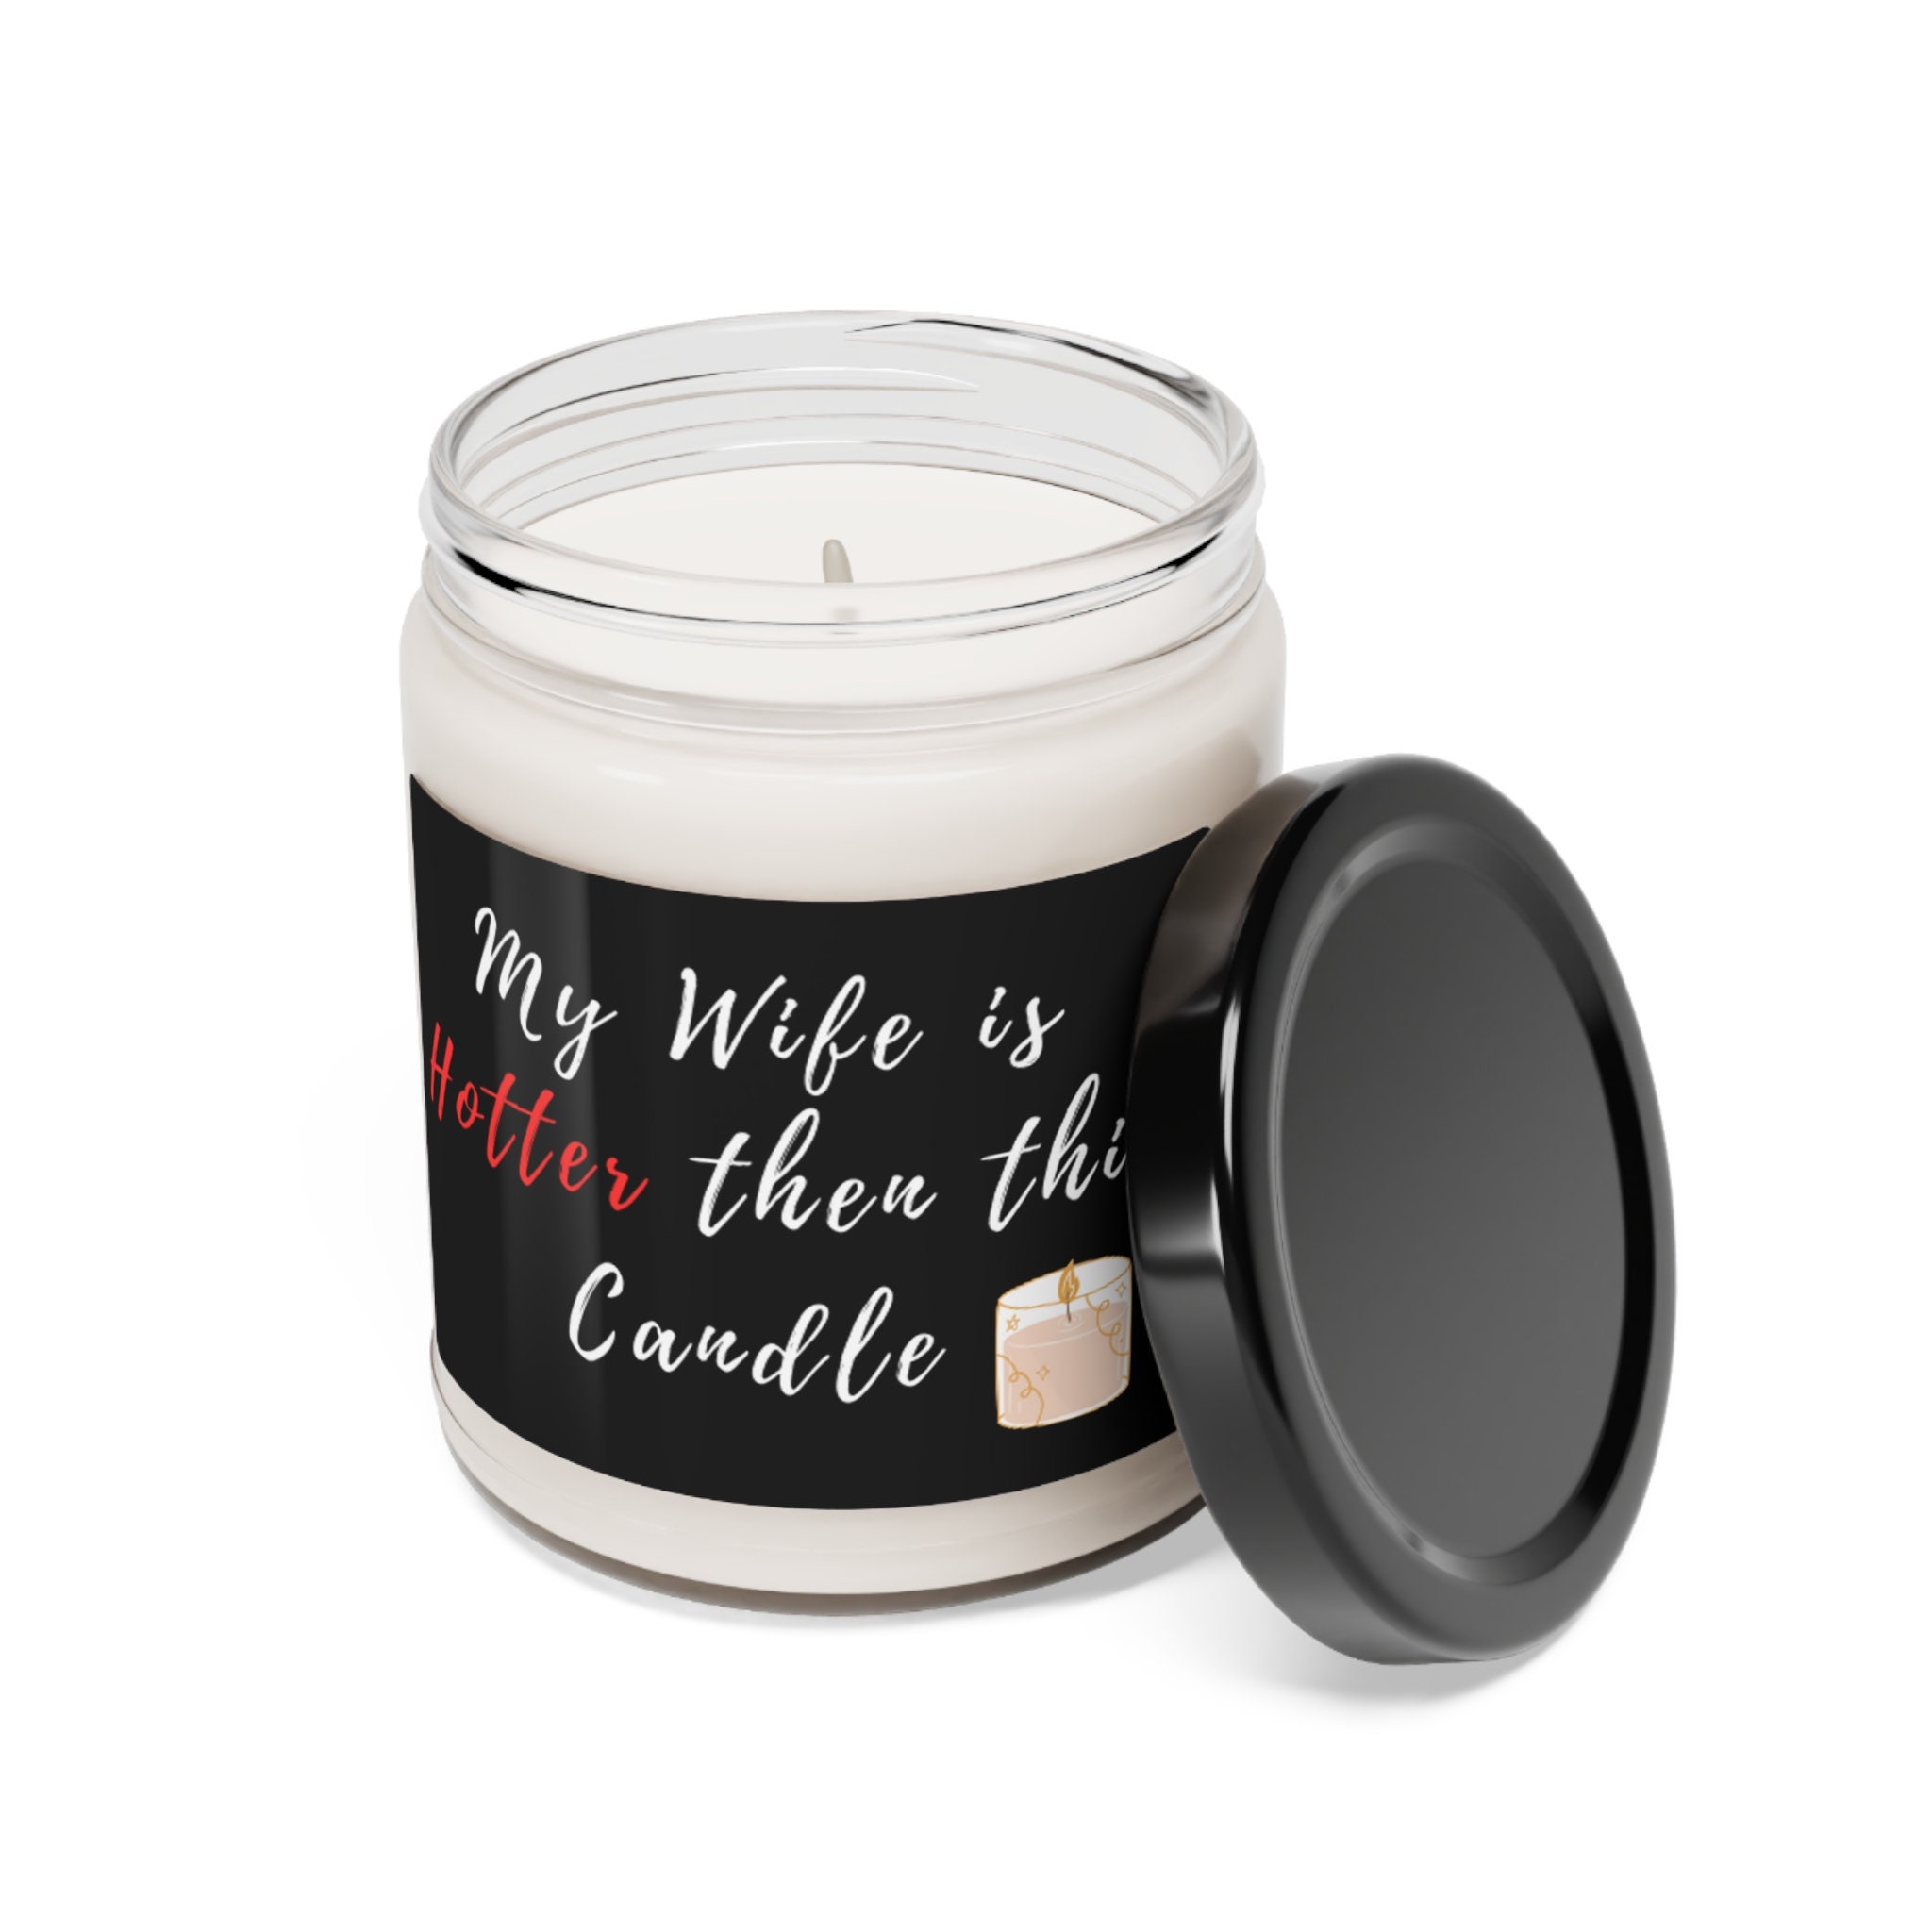 Discover My Wife is Hotter then this Candle Scented Soy Candle, 9oz Perfect Gift for Her Holiday Valentines Day Birthday.